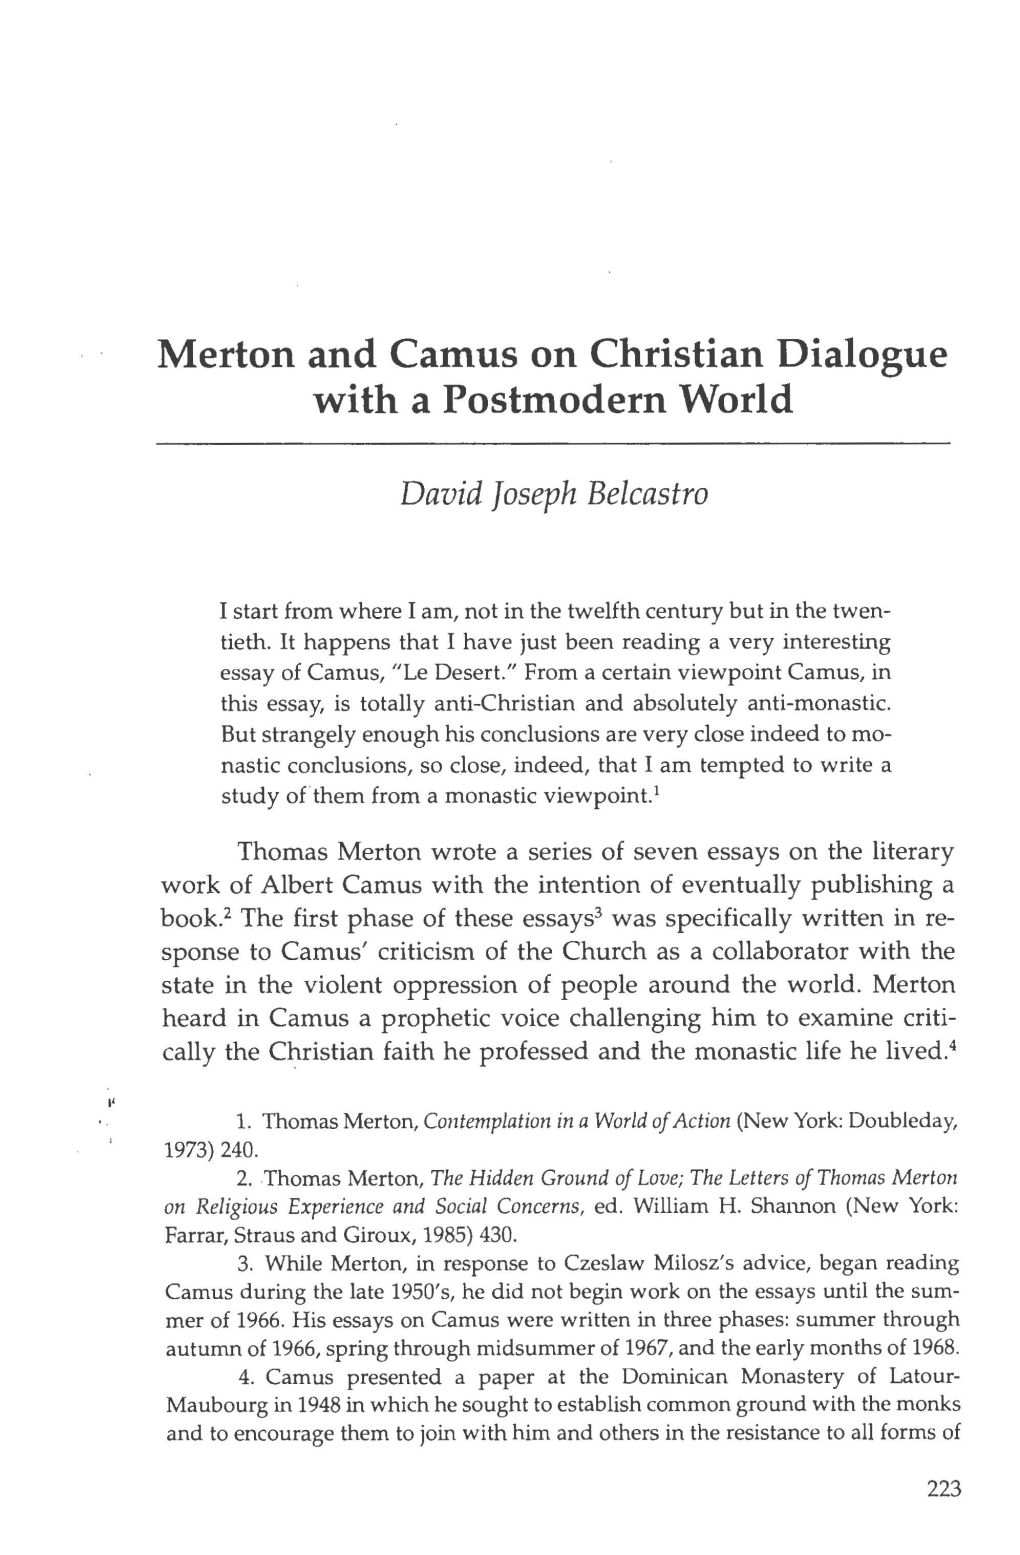 Merton and Camus on Christian Dialogue with a Postmodern World